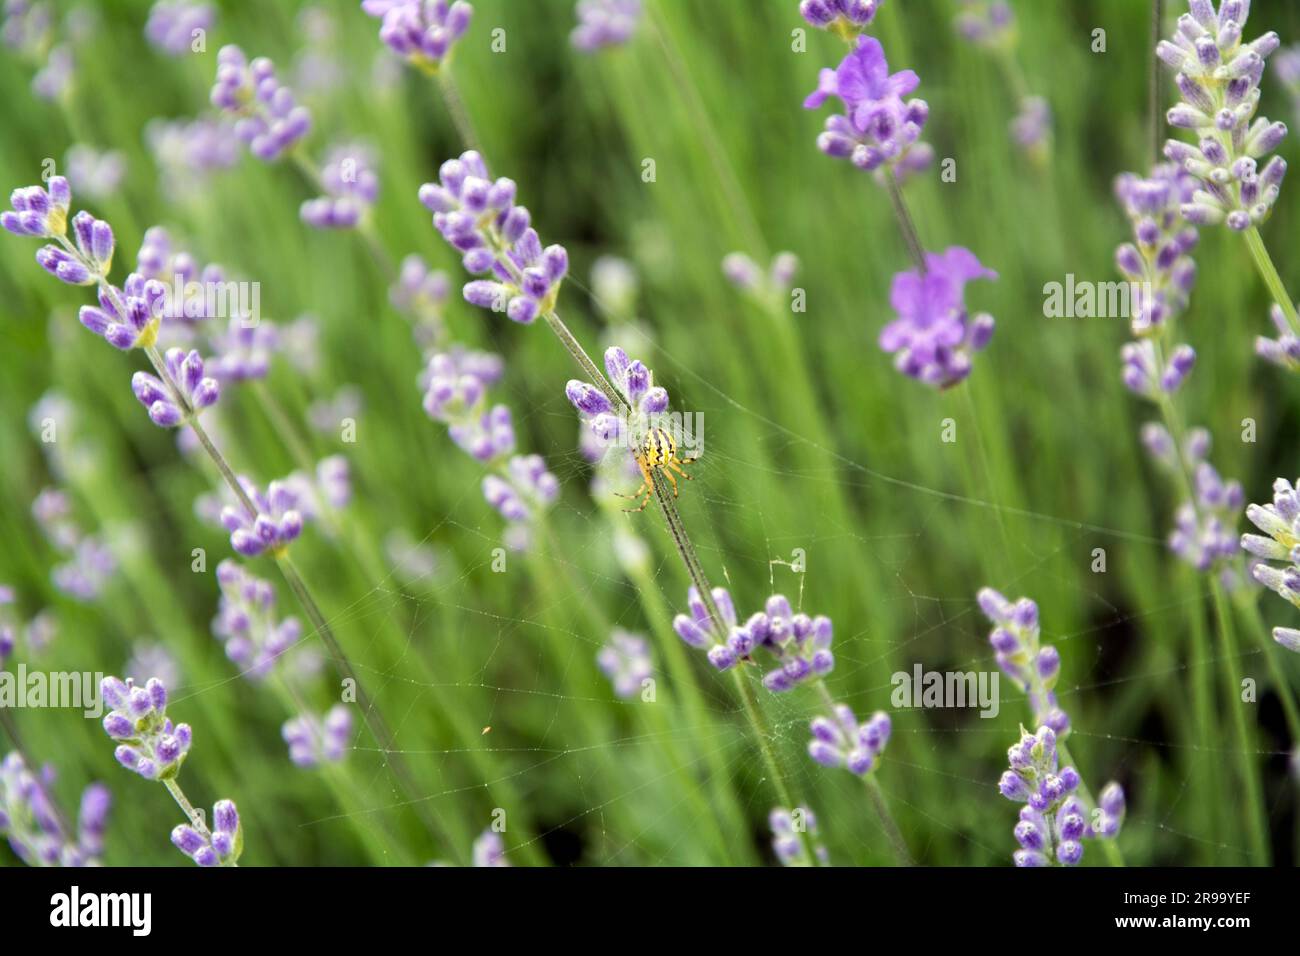 Closeup of a small yellow spider (Neoscona adianta) sitting on a web on a lavender flower in the first days of blooming in June. Horizontal image with Stock Photo